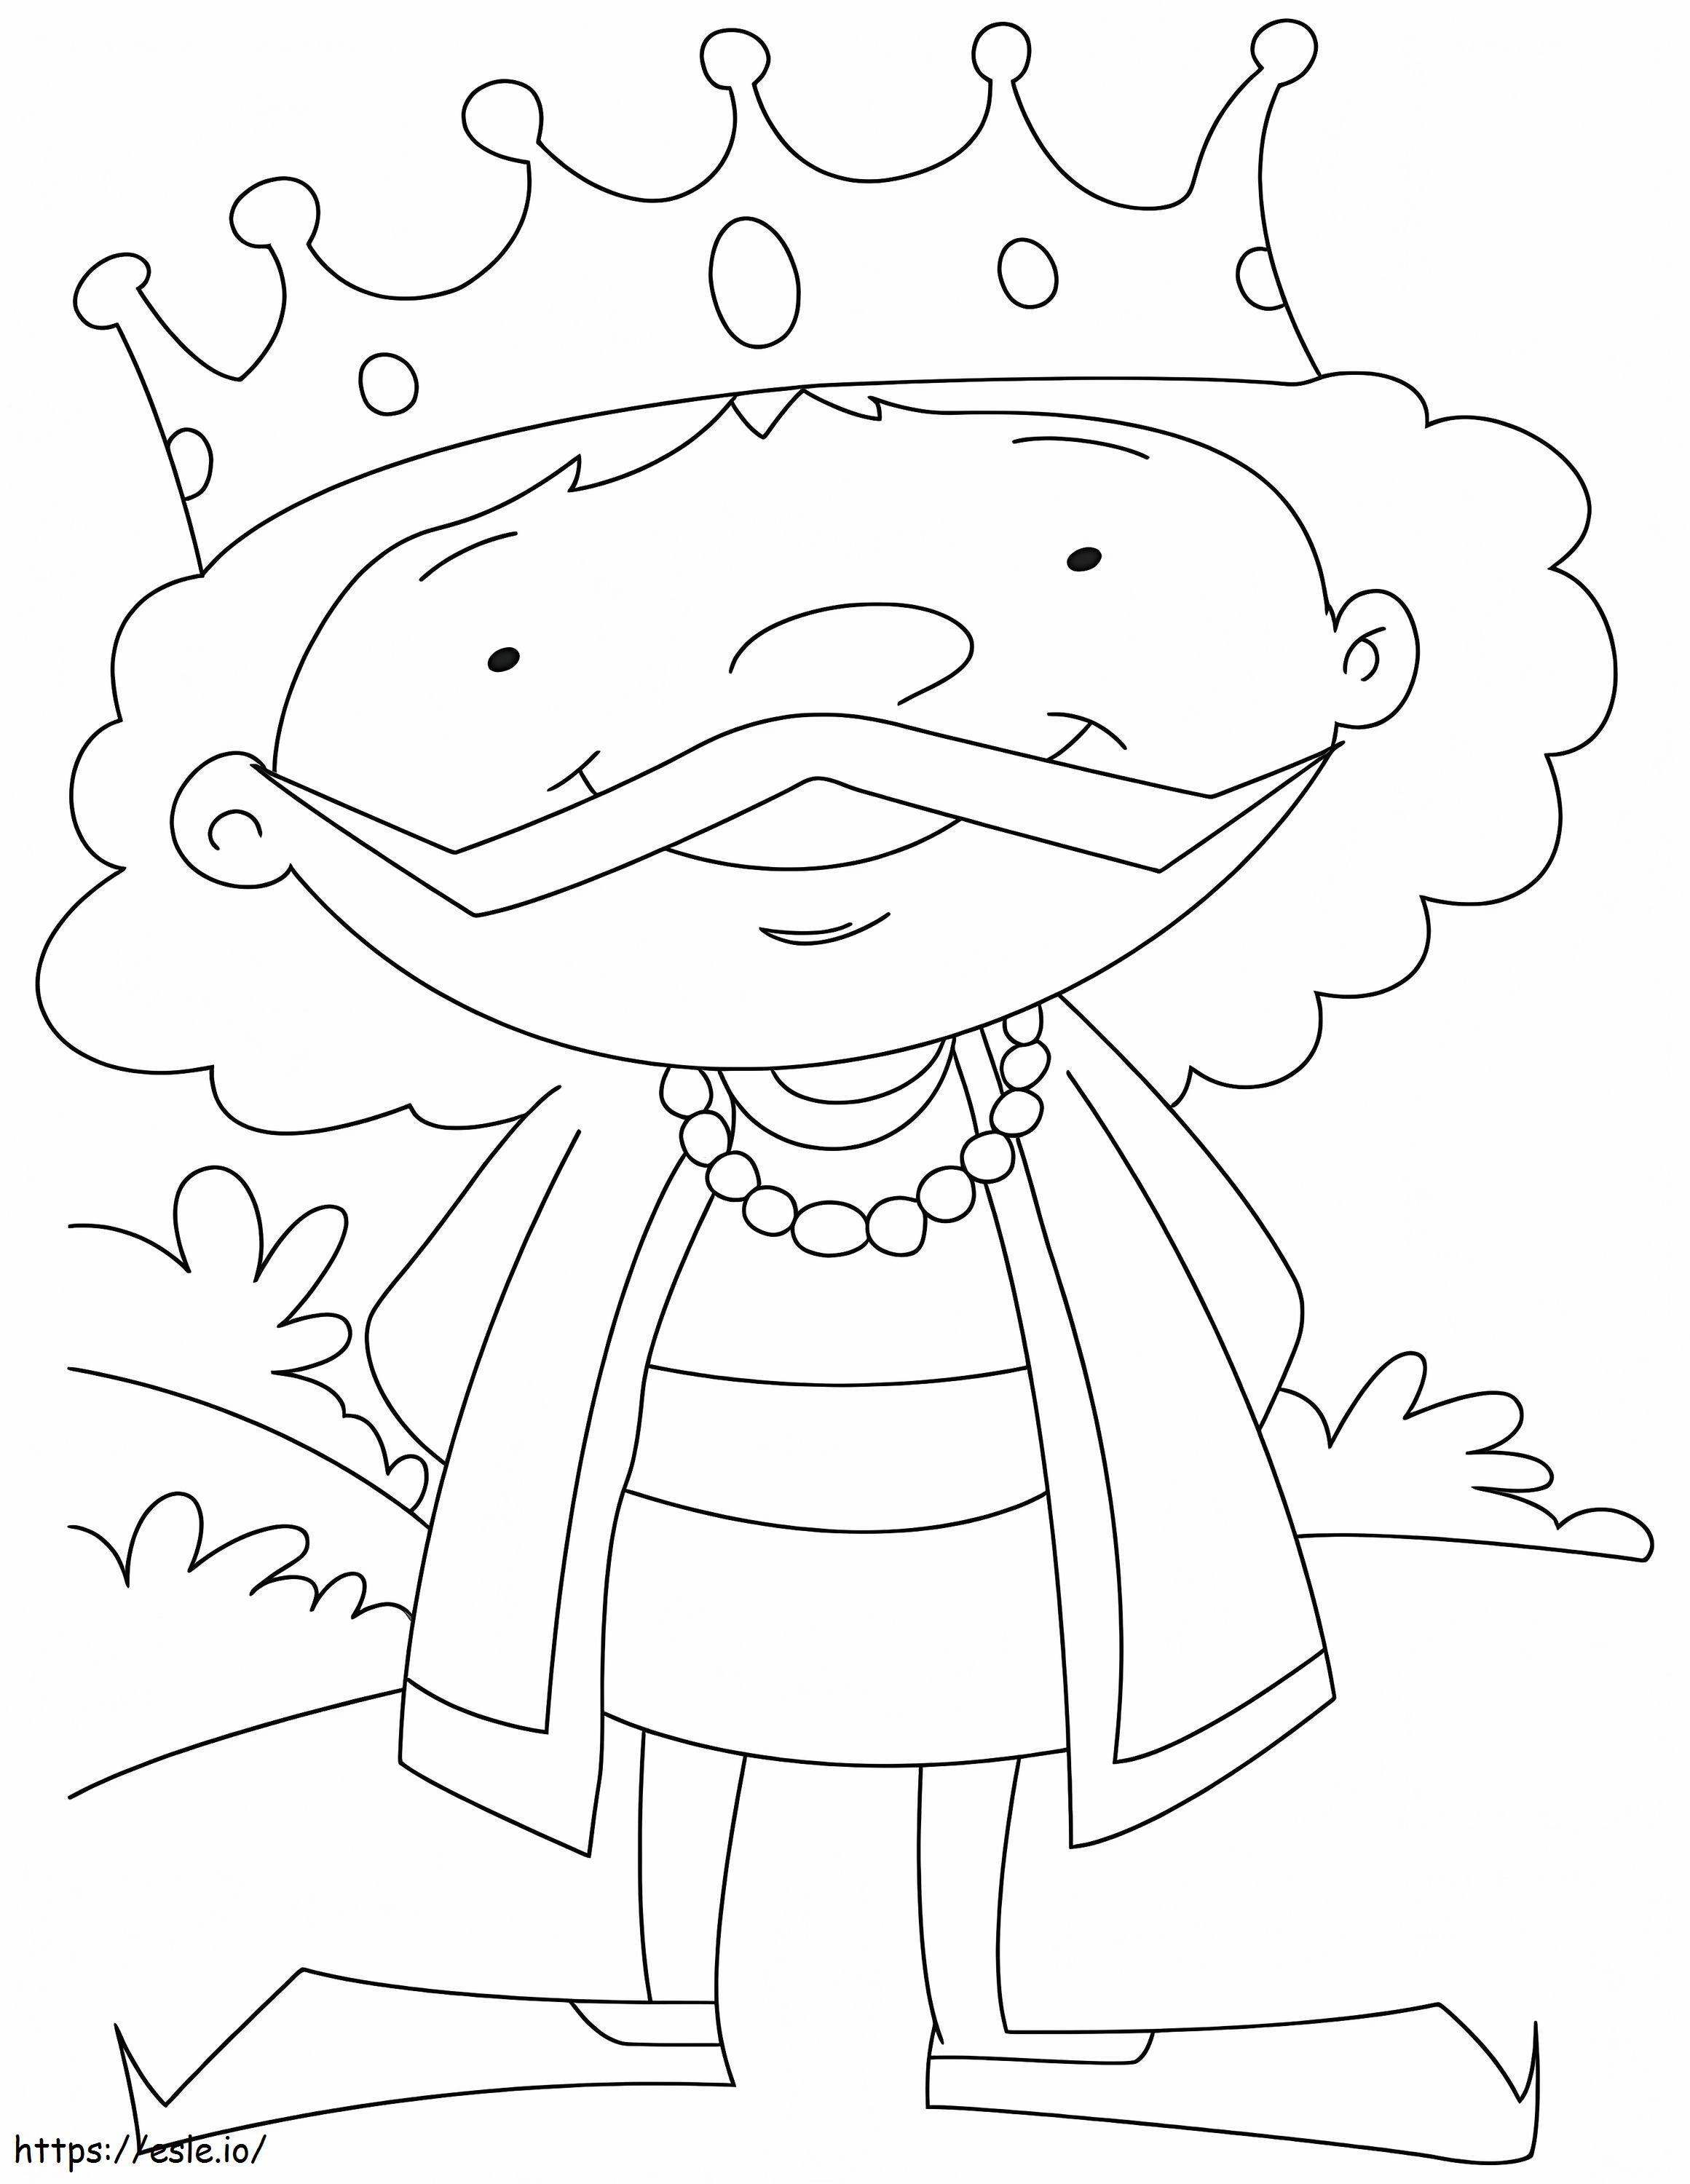 The Dwarf King Laughs coloring page